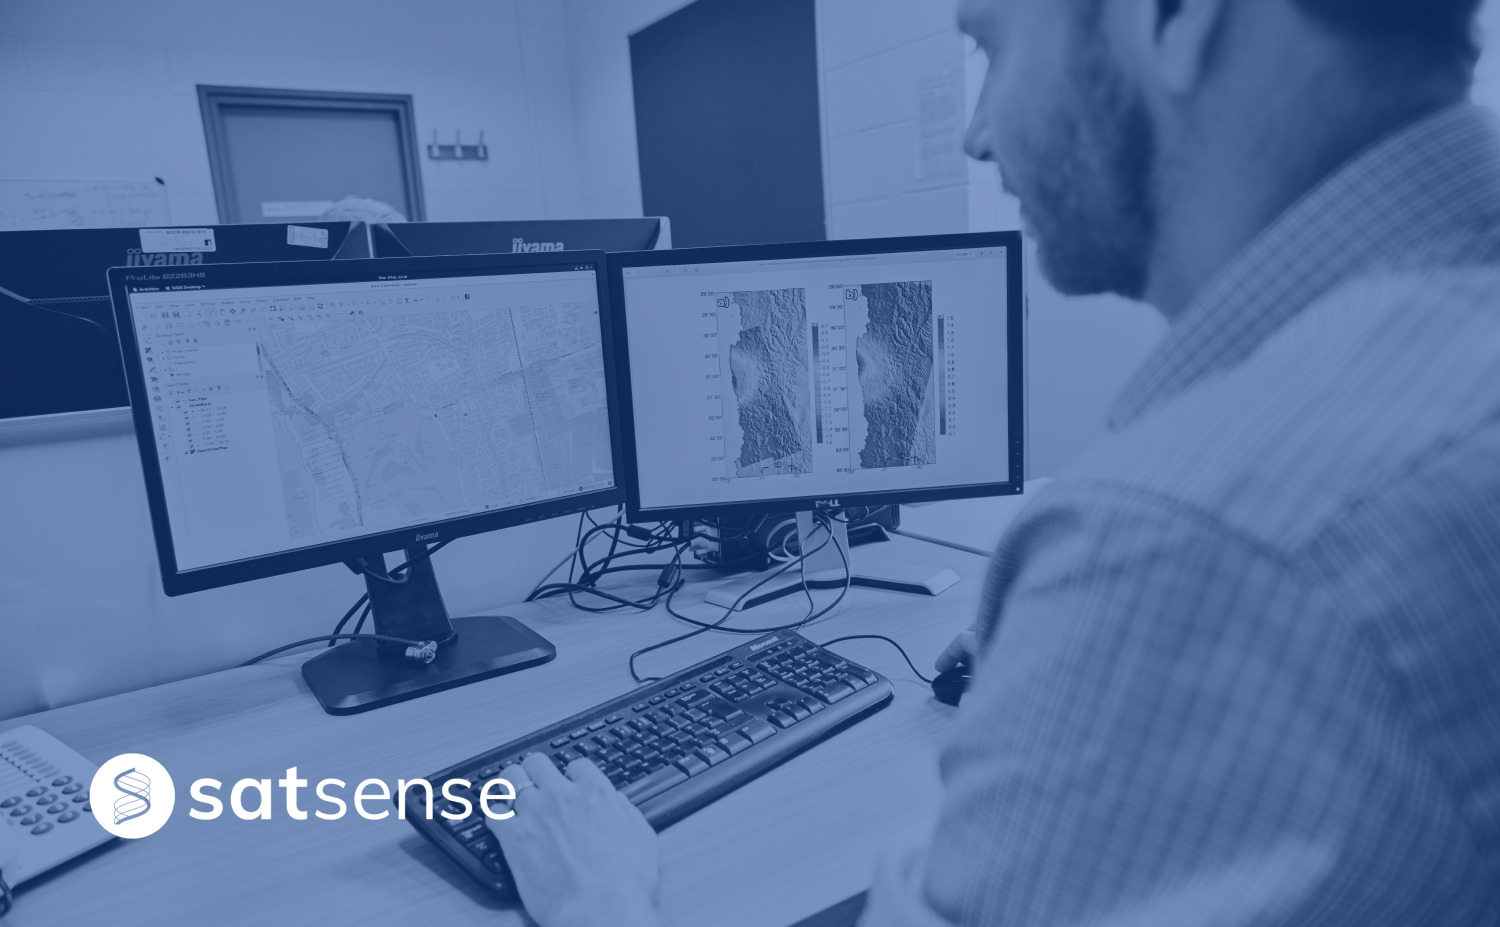 SatSense InSAR specialists analysing InSAR velocities over a large area using multiple softwares on different computer screens